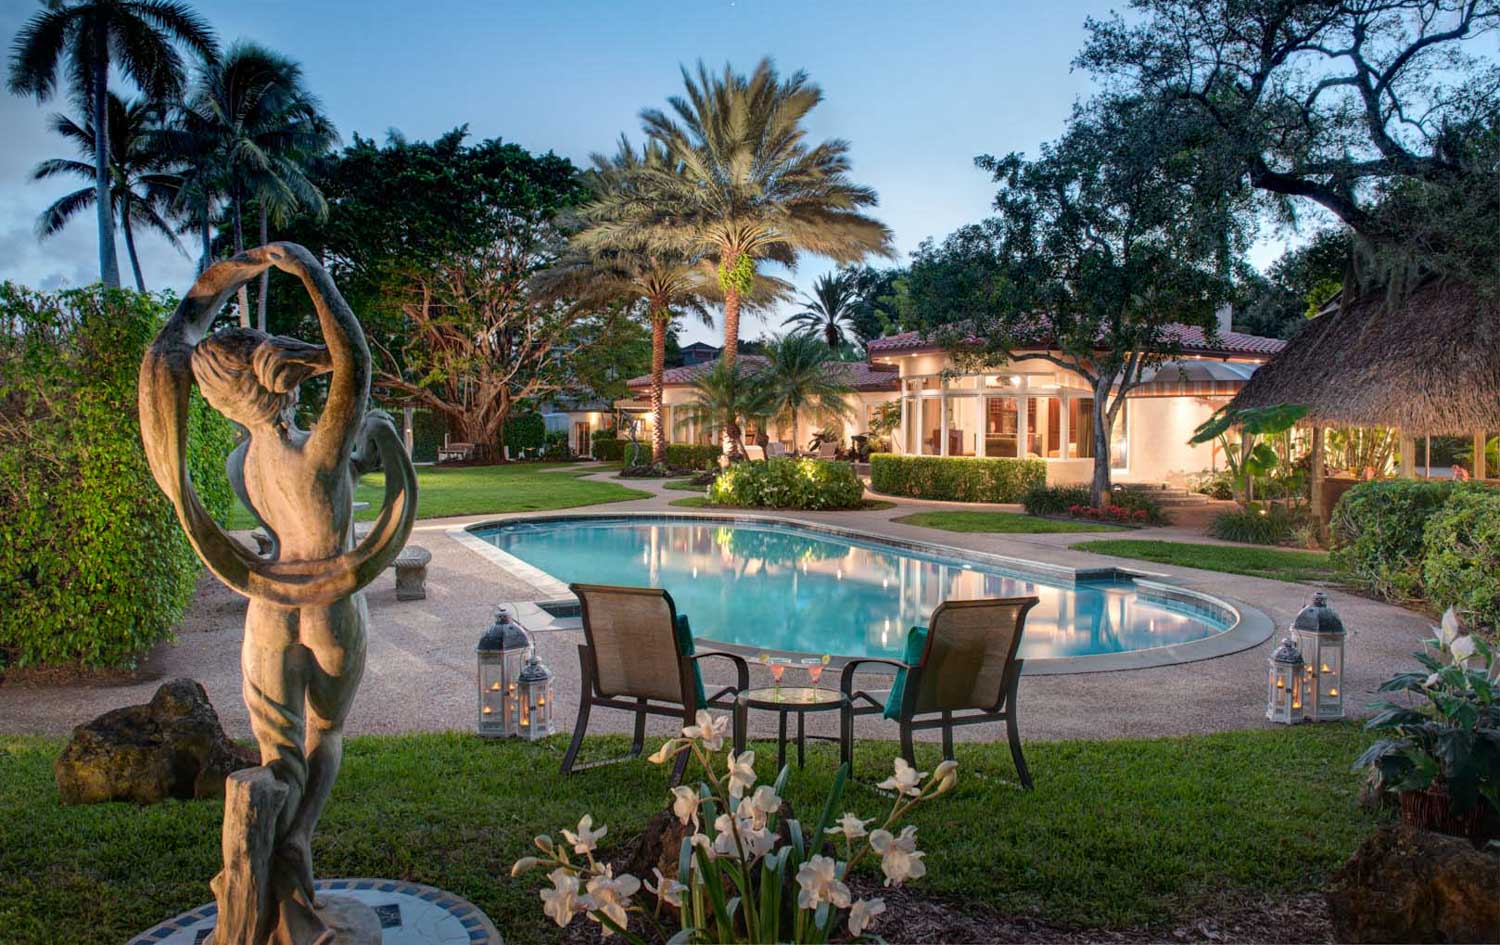 1510 SW 15 Ave - Exterior of Estate with View From Courtyard, Looking to Pool and Mansion